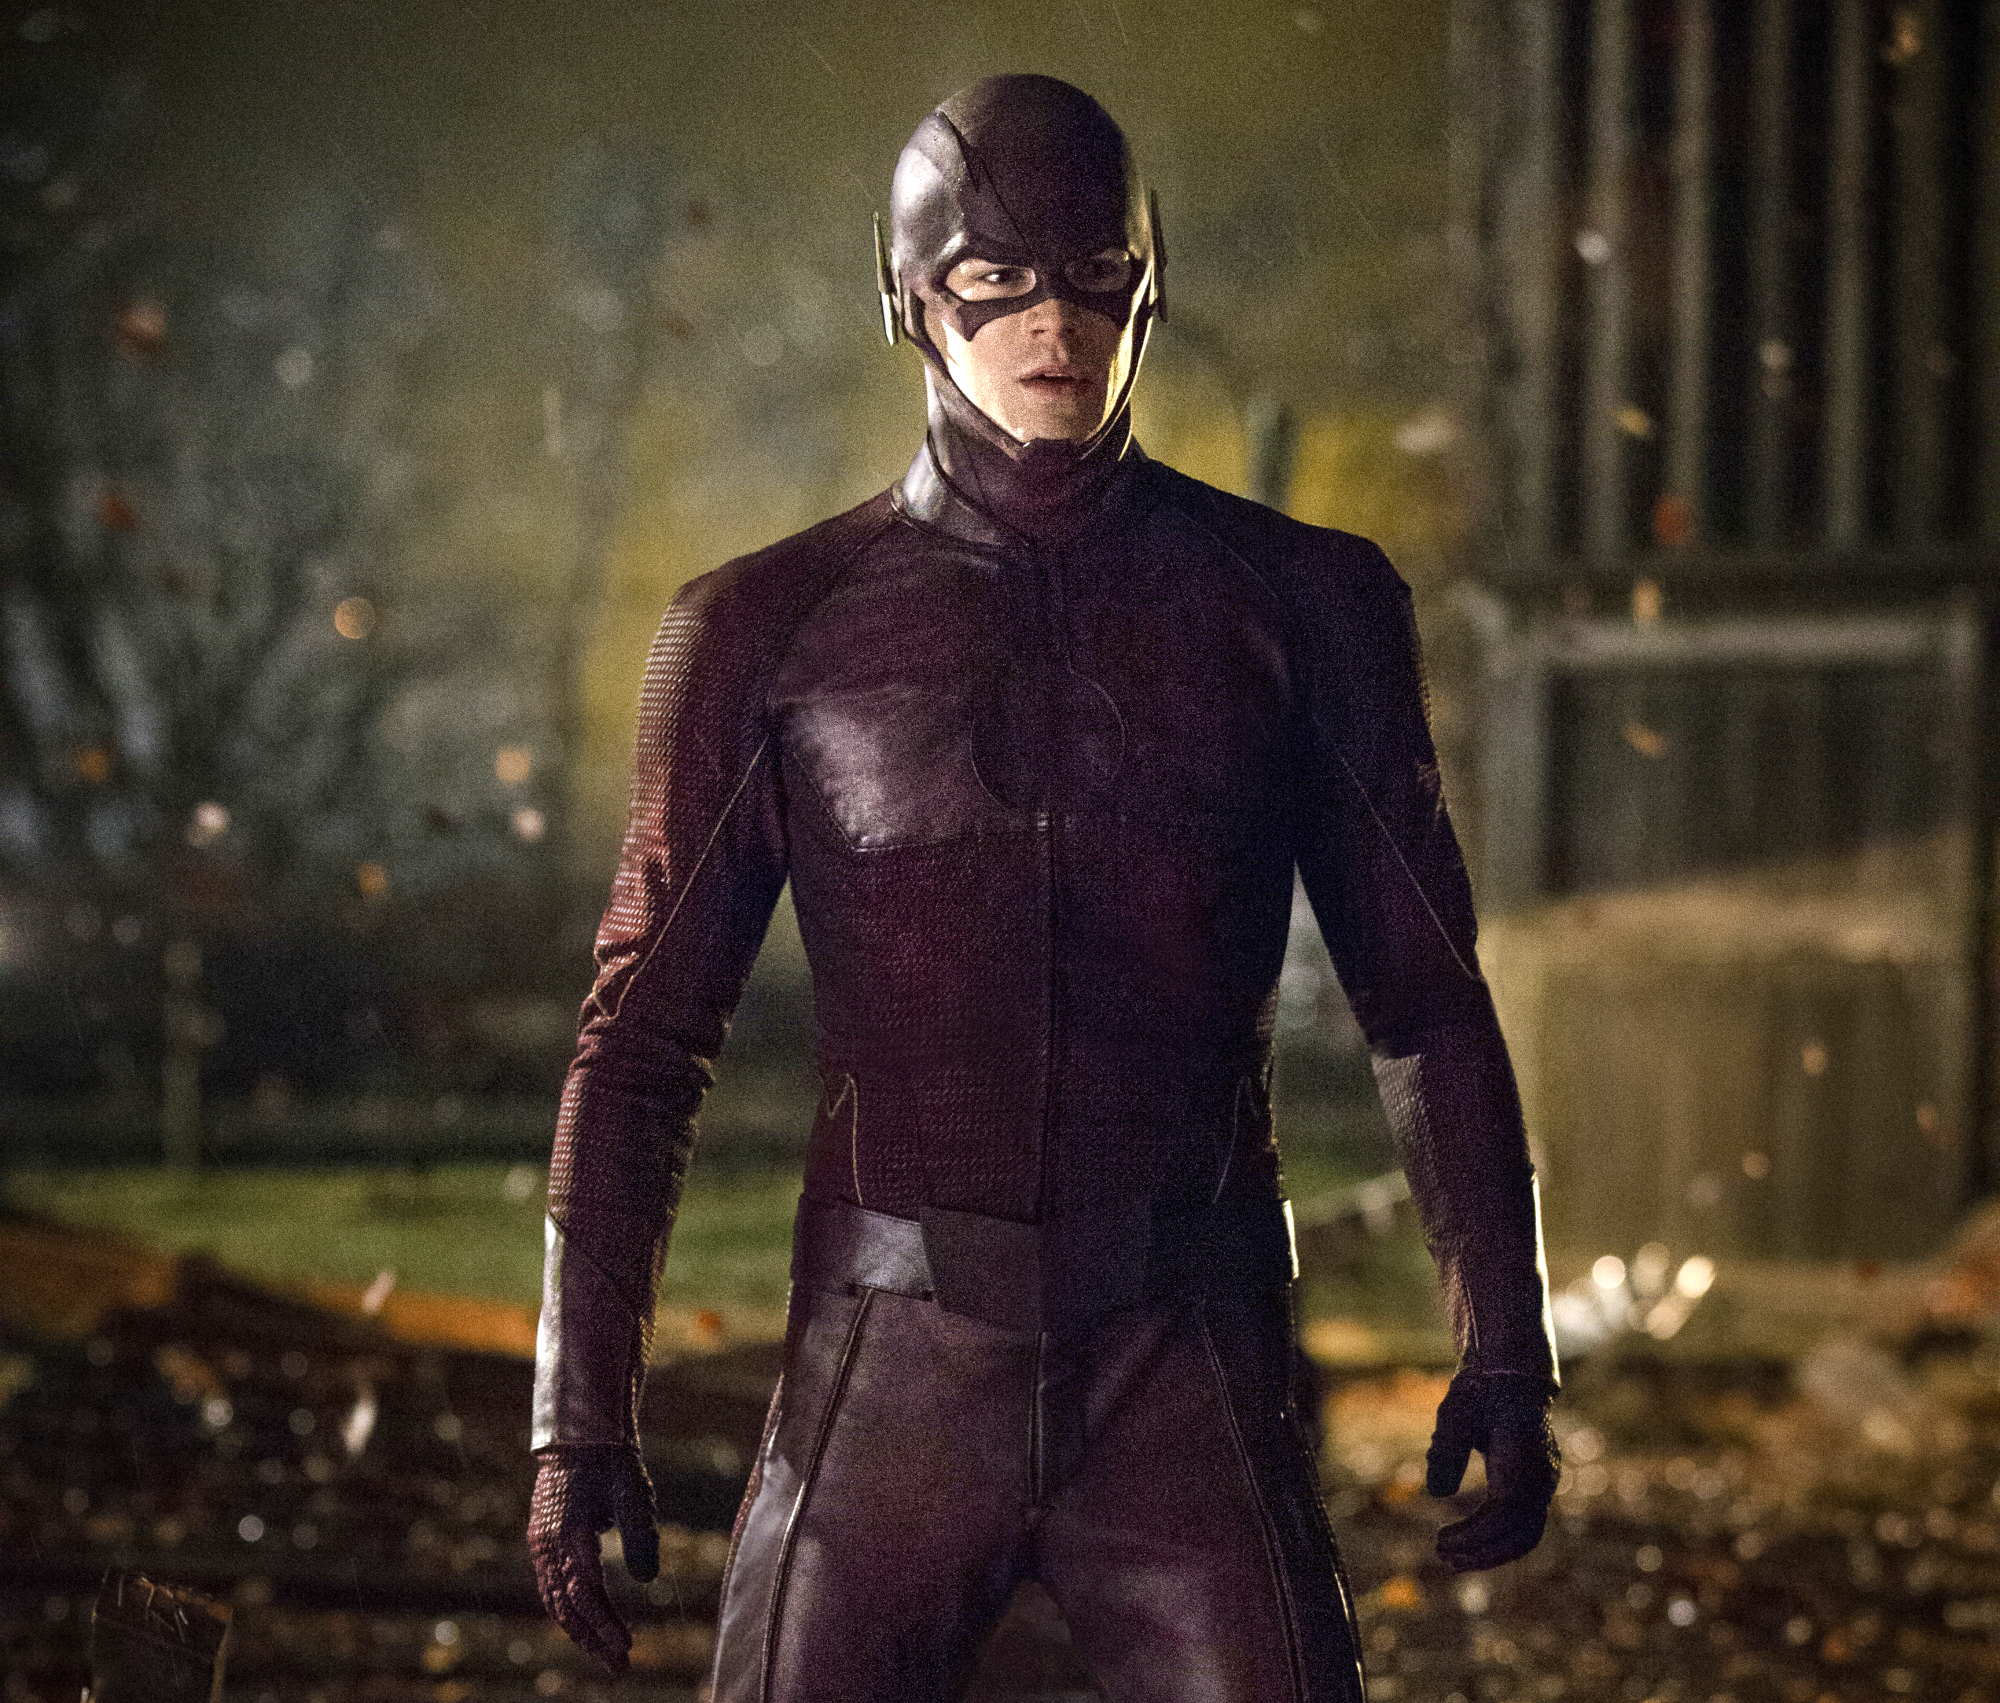 Grant Gustin excited to suit up as ‘The Flash’ - The Blade